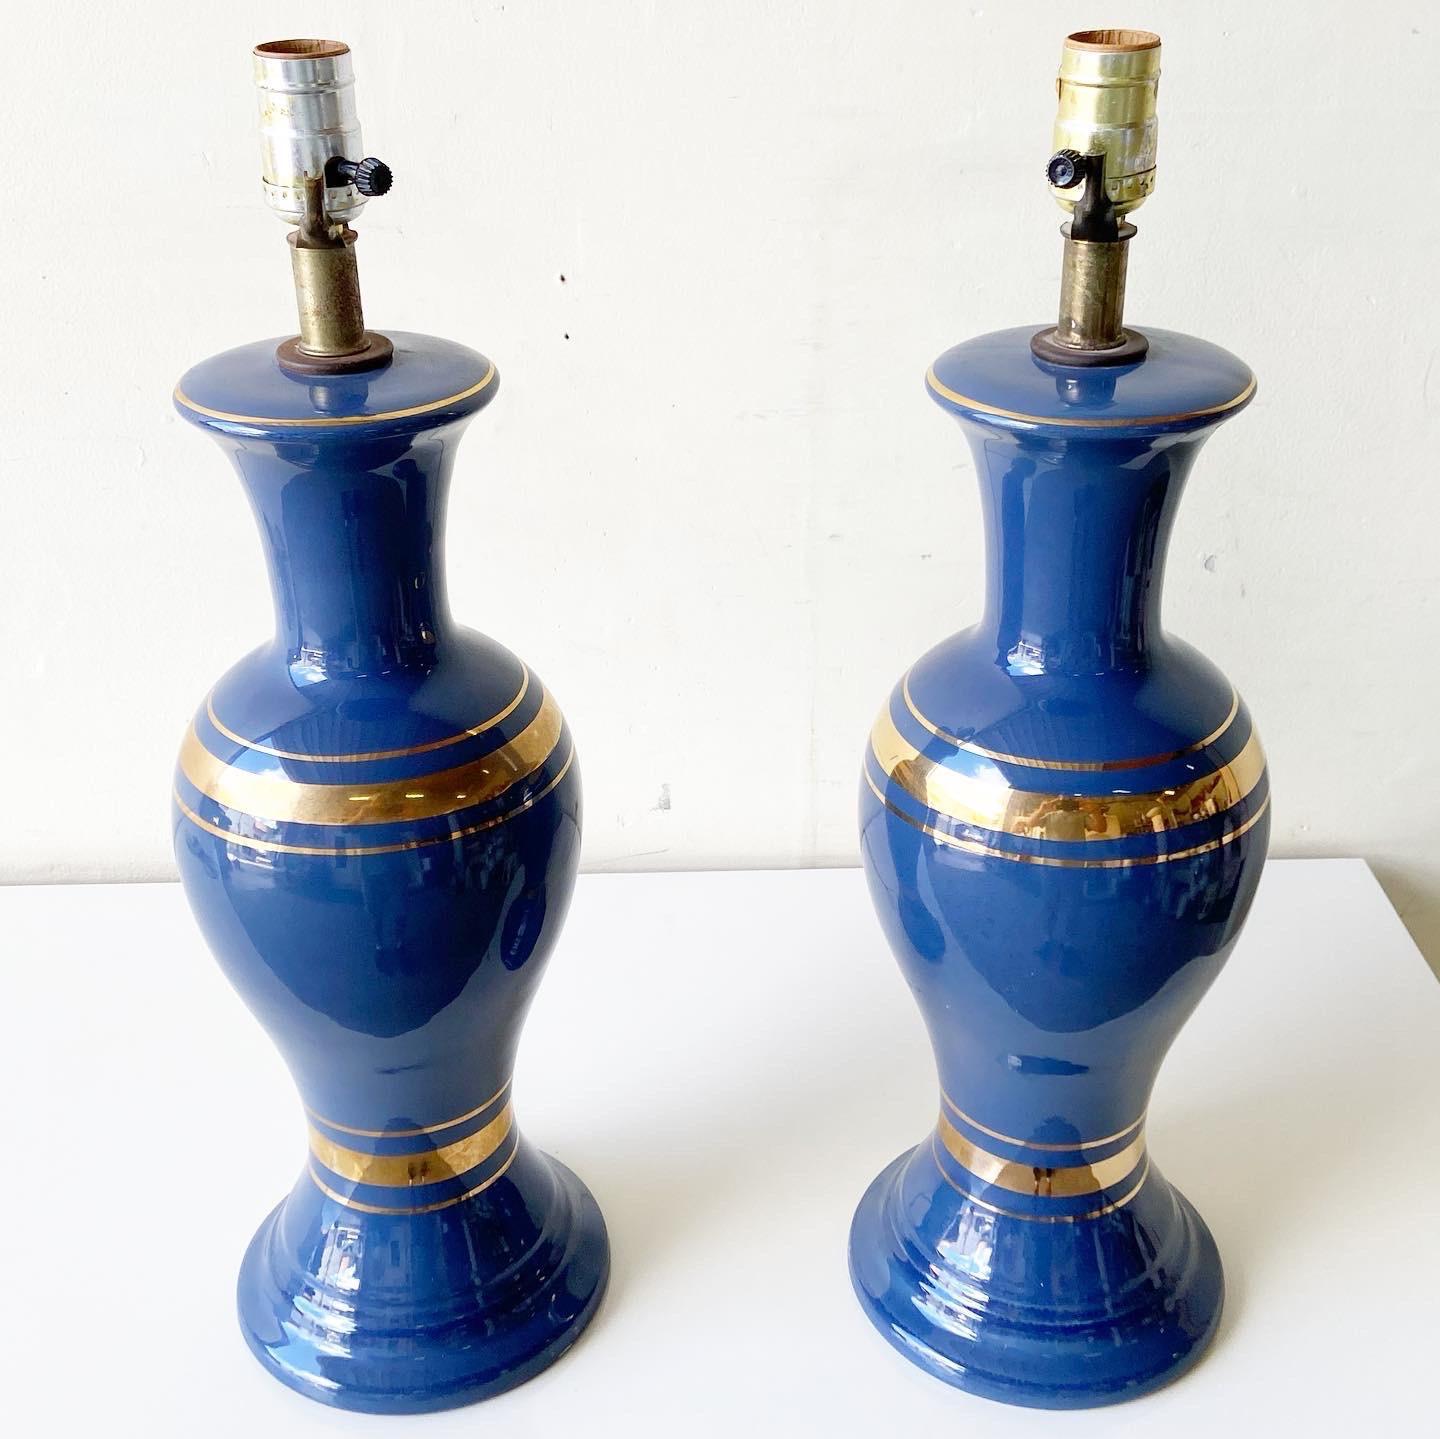 American Mid Century Modern Blue and Gold Porcelain Table Lamps – a Pair For Sale